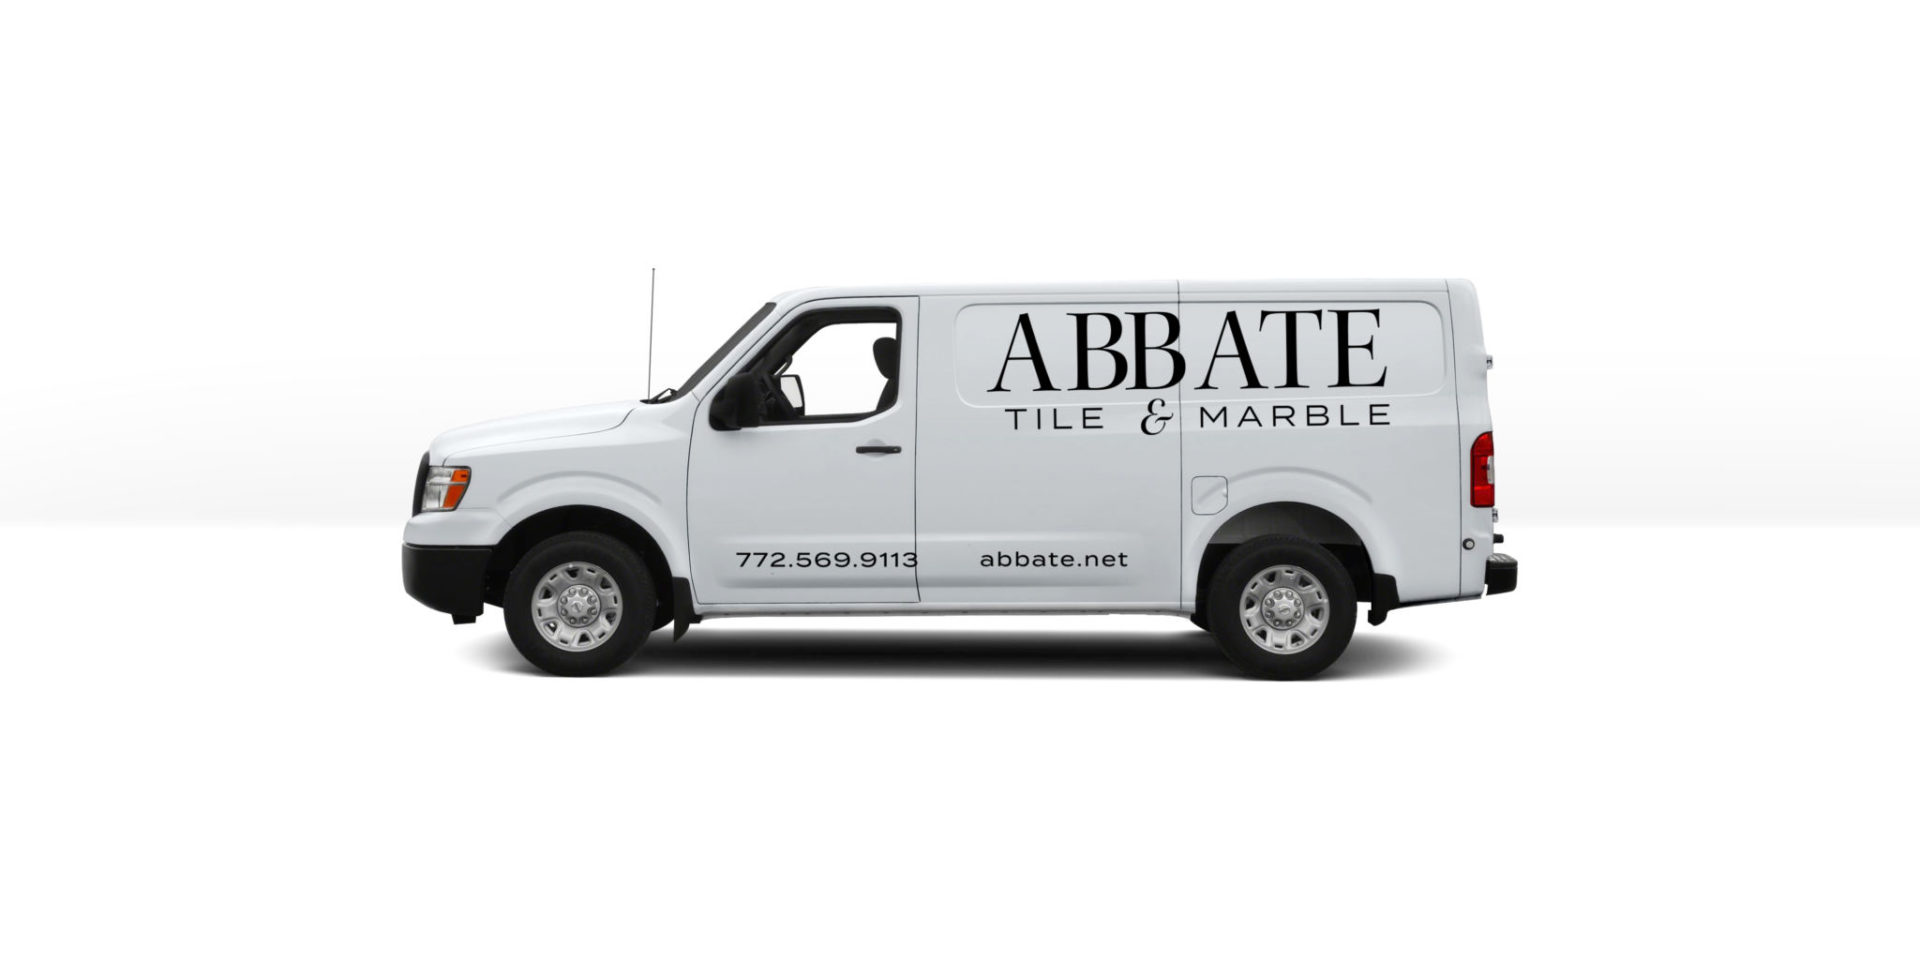 Vehicle graphic design work done for Abbate Tile and Marble van in Vero Beach.